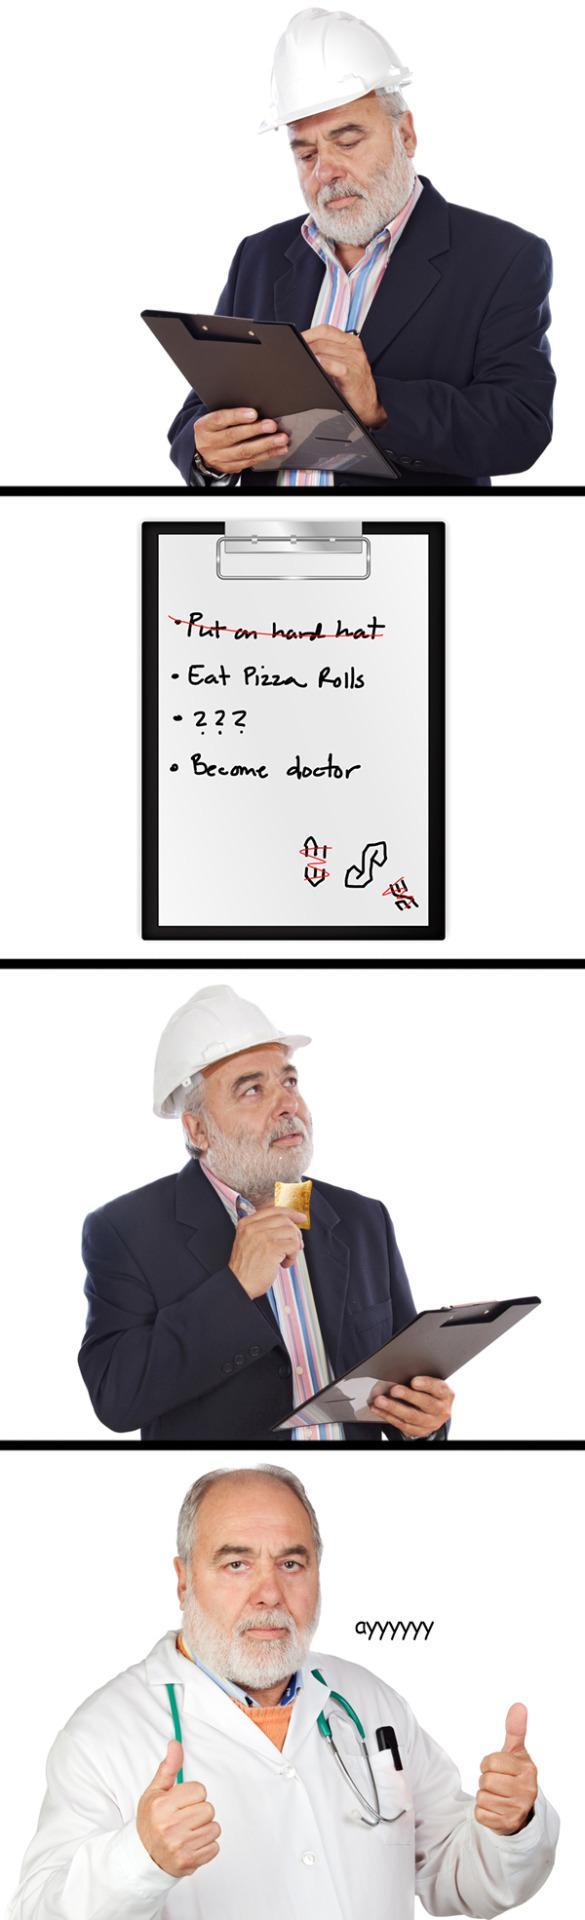 How to become a doctor - meme